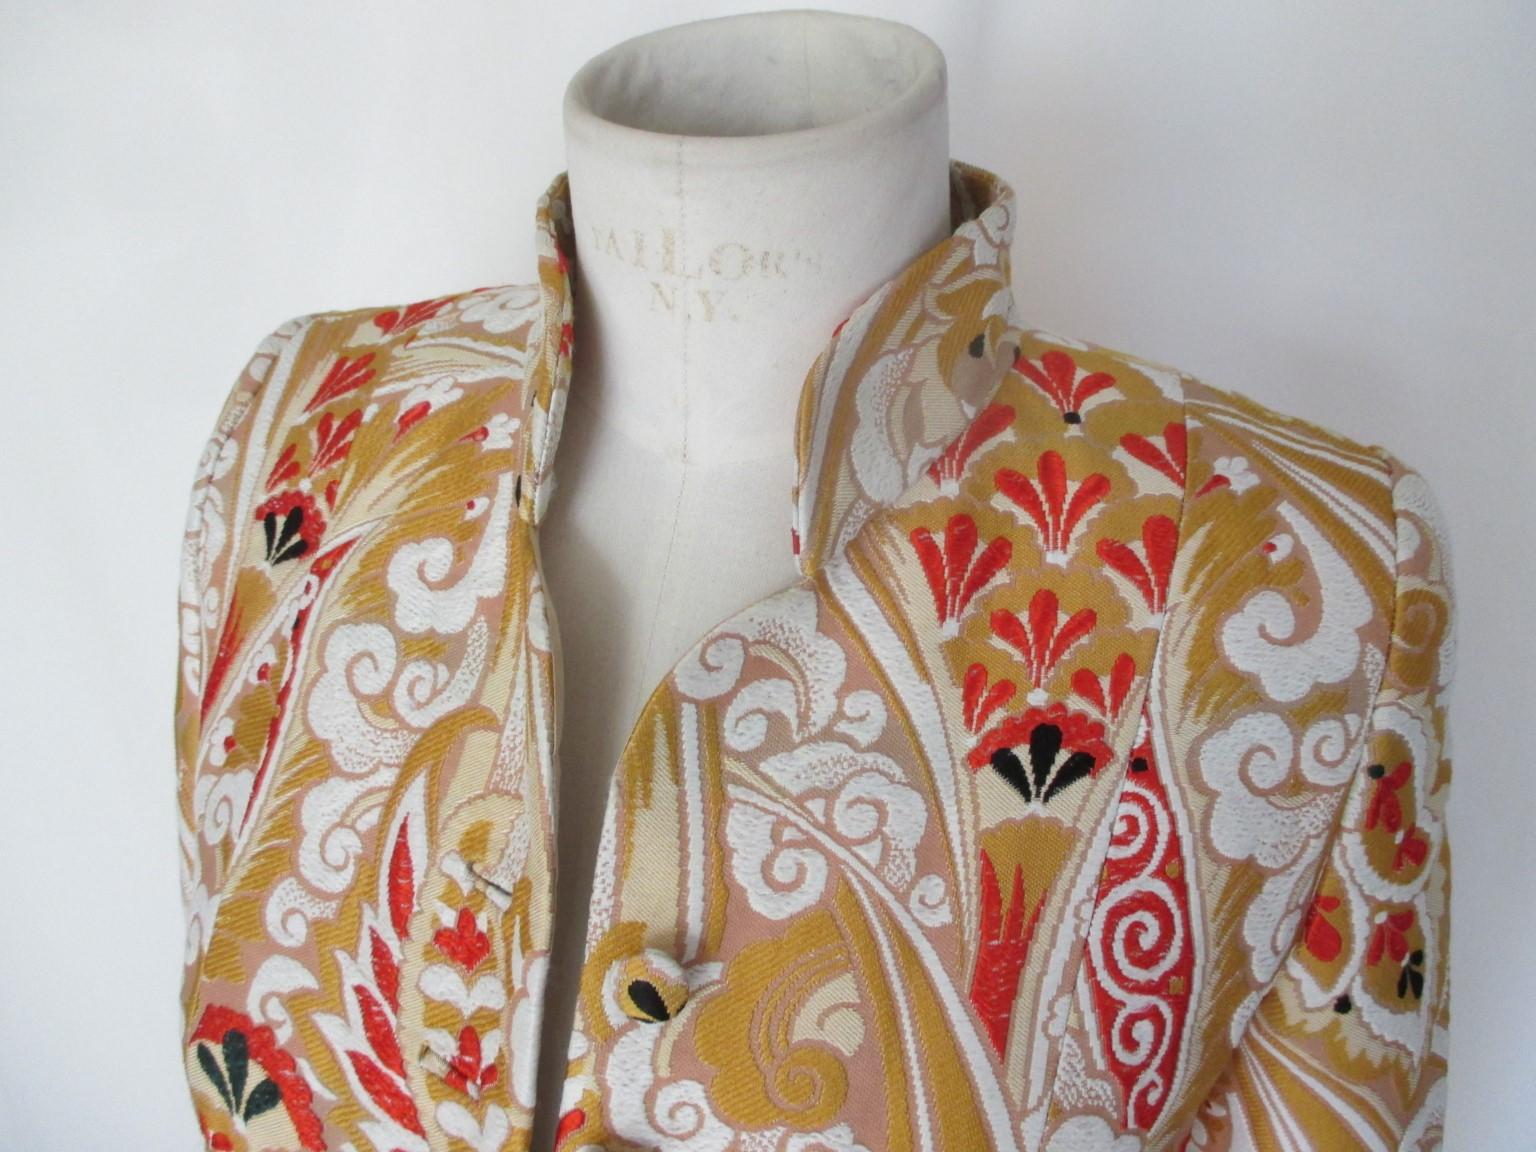 This is a rare vintage kimono style jacket from the High End Armani Prive collection

We offer more exclusive vintage items, view our frontstore.

Details:
Collectors - item
Material : silk blend
Kimono Japanese style fabric with orange oriental